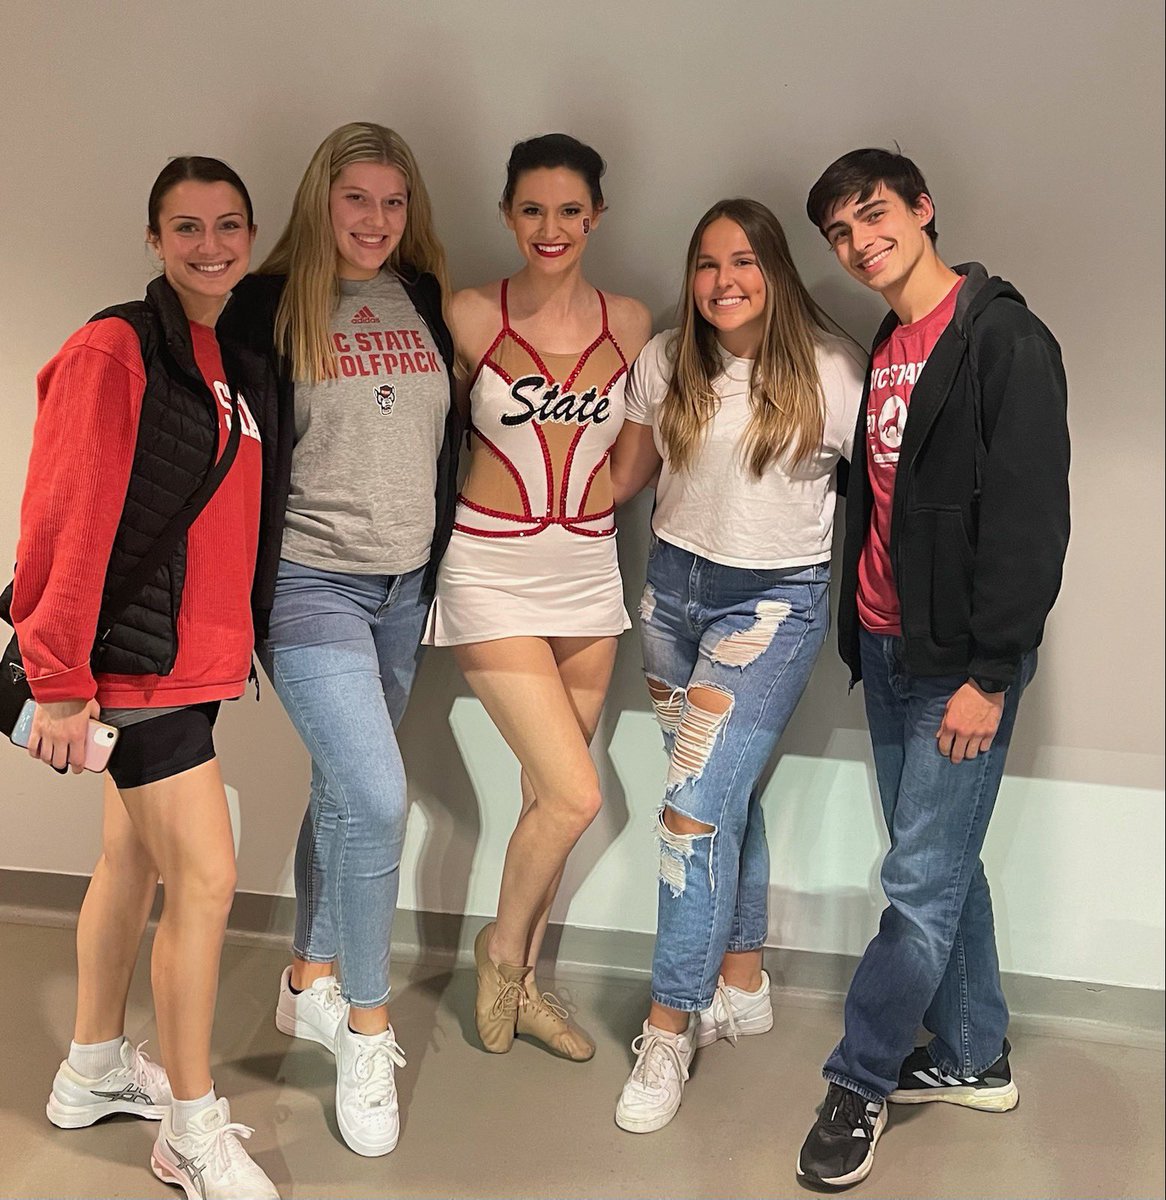 We had so much fun cheering on Allison, @NCSUCheer, @ncsudanceteam, @NCStateMusic, Mr. and Mrs. Wuf, and @ncsu_ladypack tonight at their send off performance! Everyone was AMAZING and good luck this week at Nationals!!! GO PACK!!❤️🖤🐺